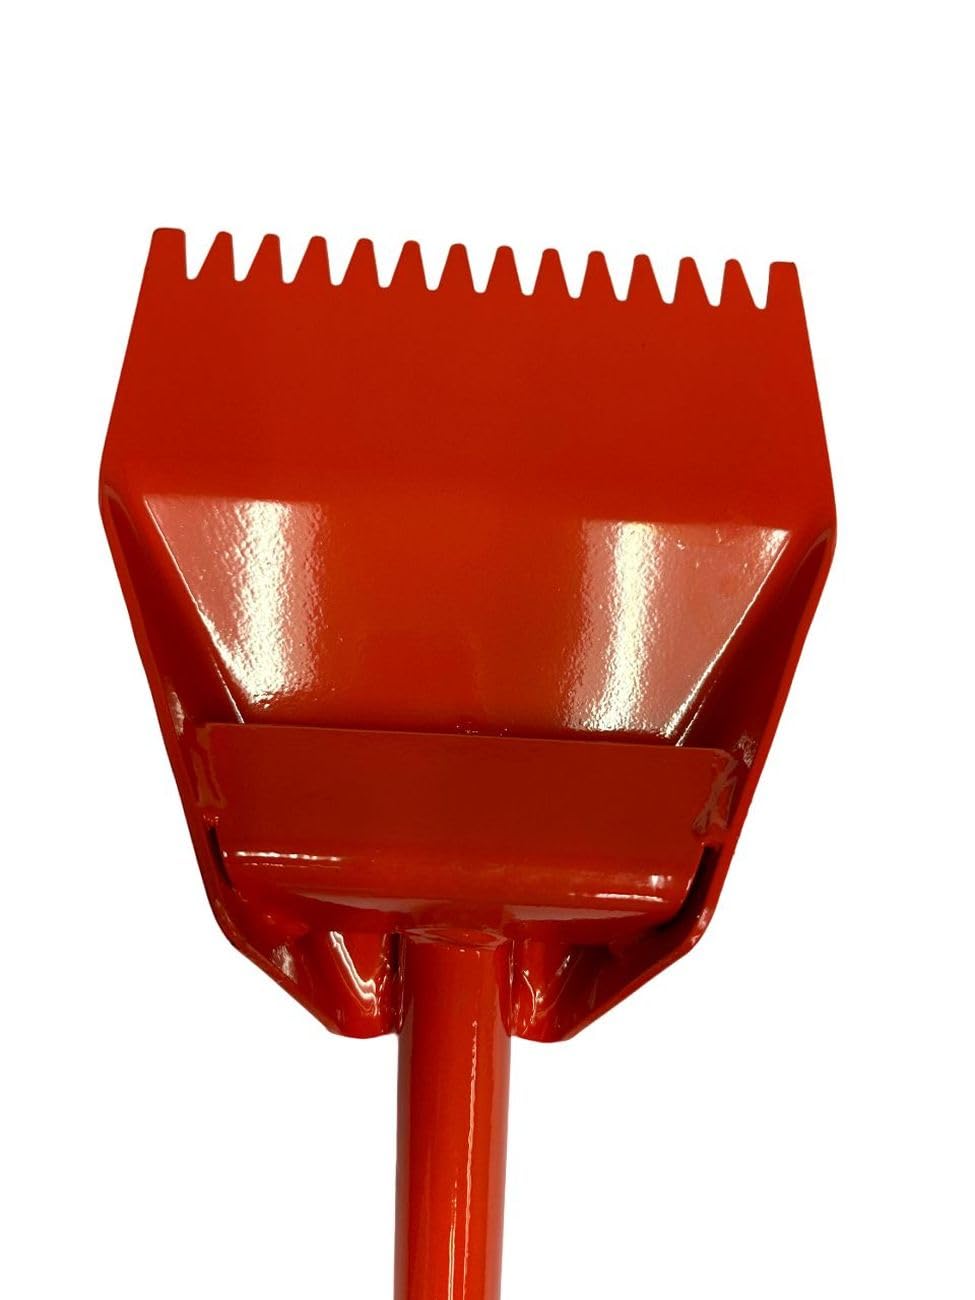 Zeluga ZL255 | D-Grip Handle Shingle Remover and Ripper